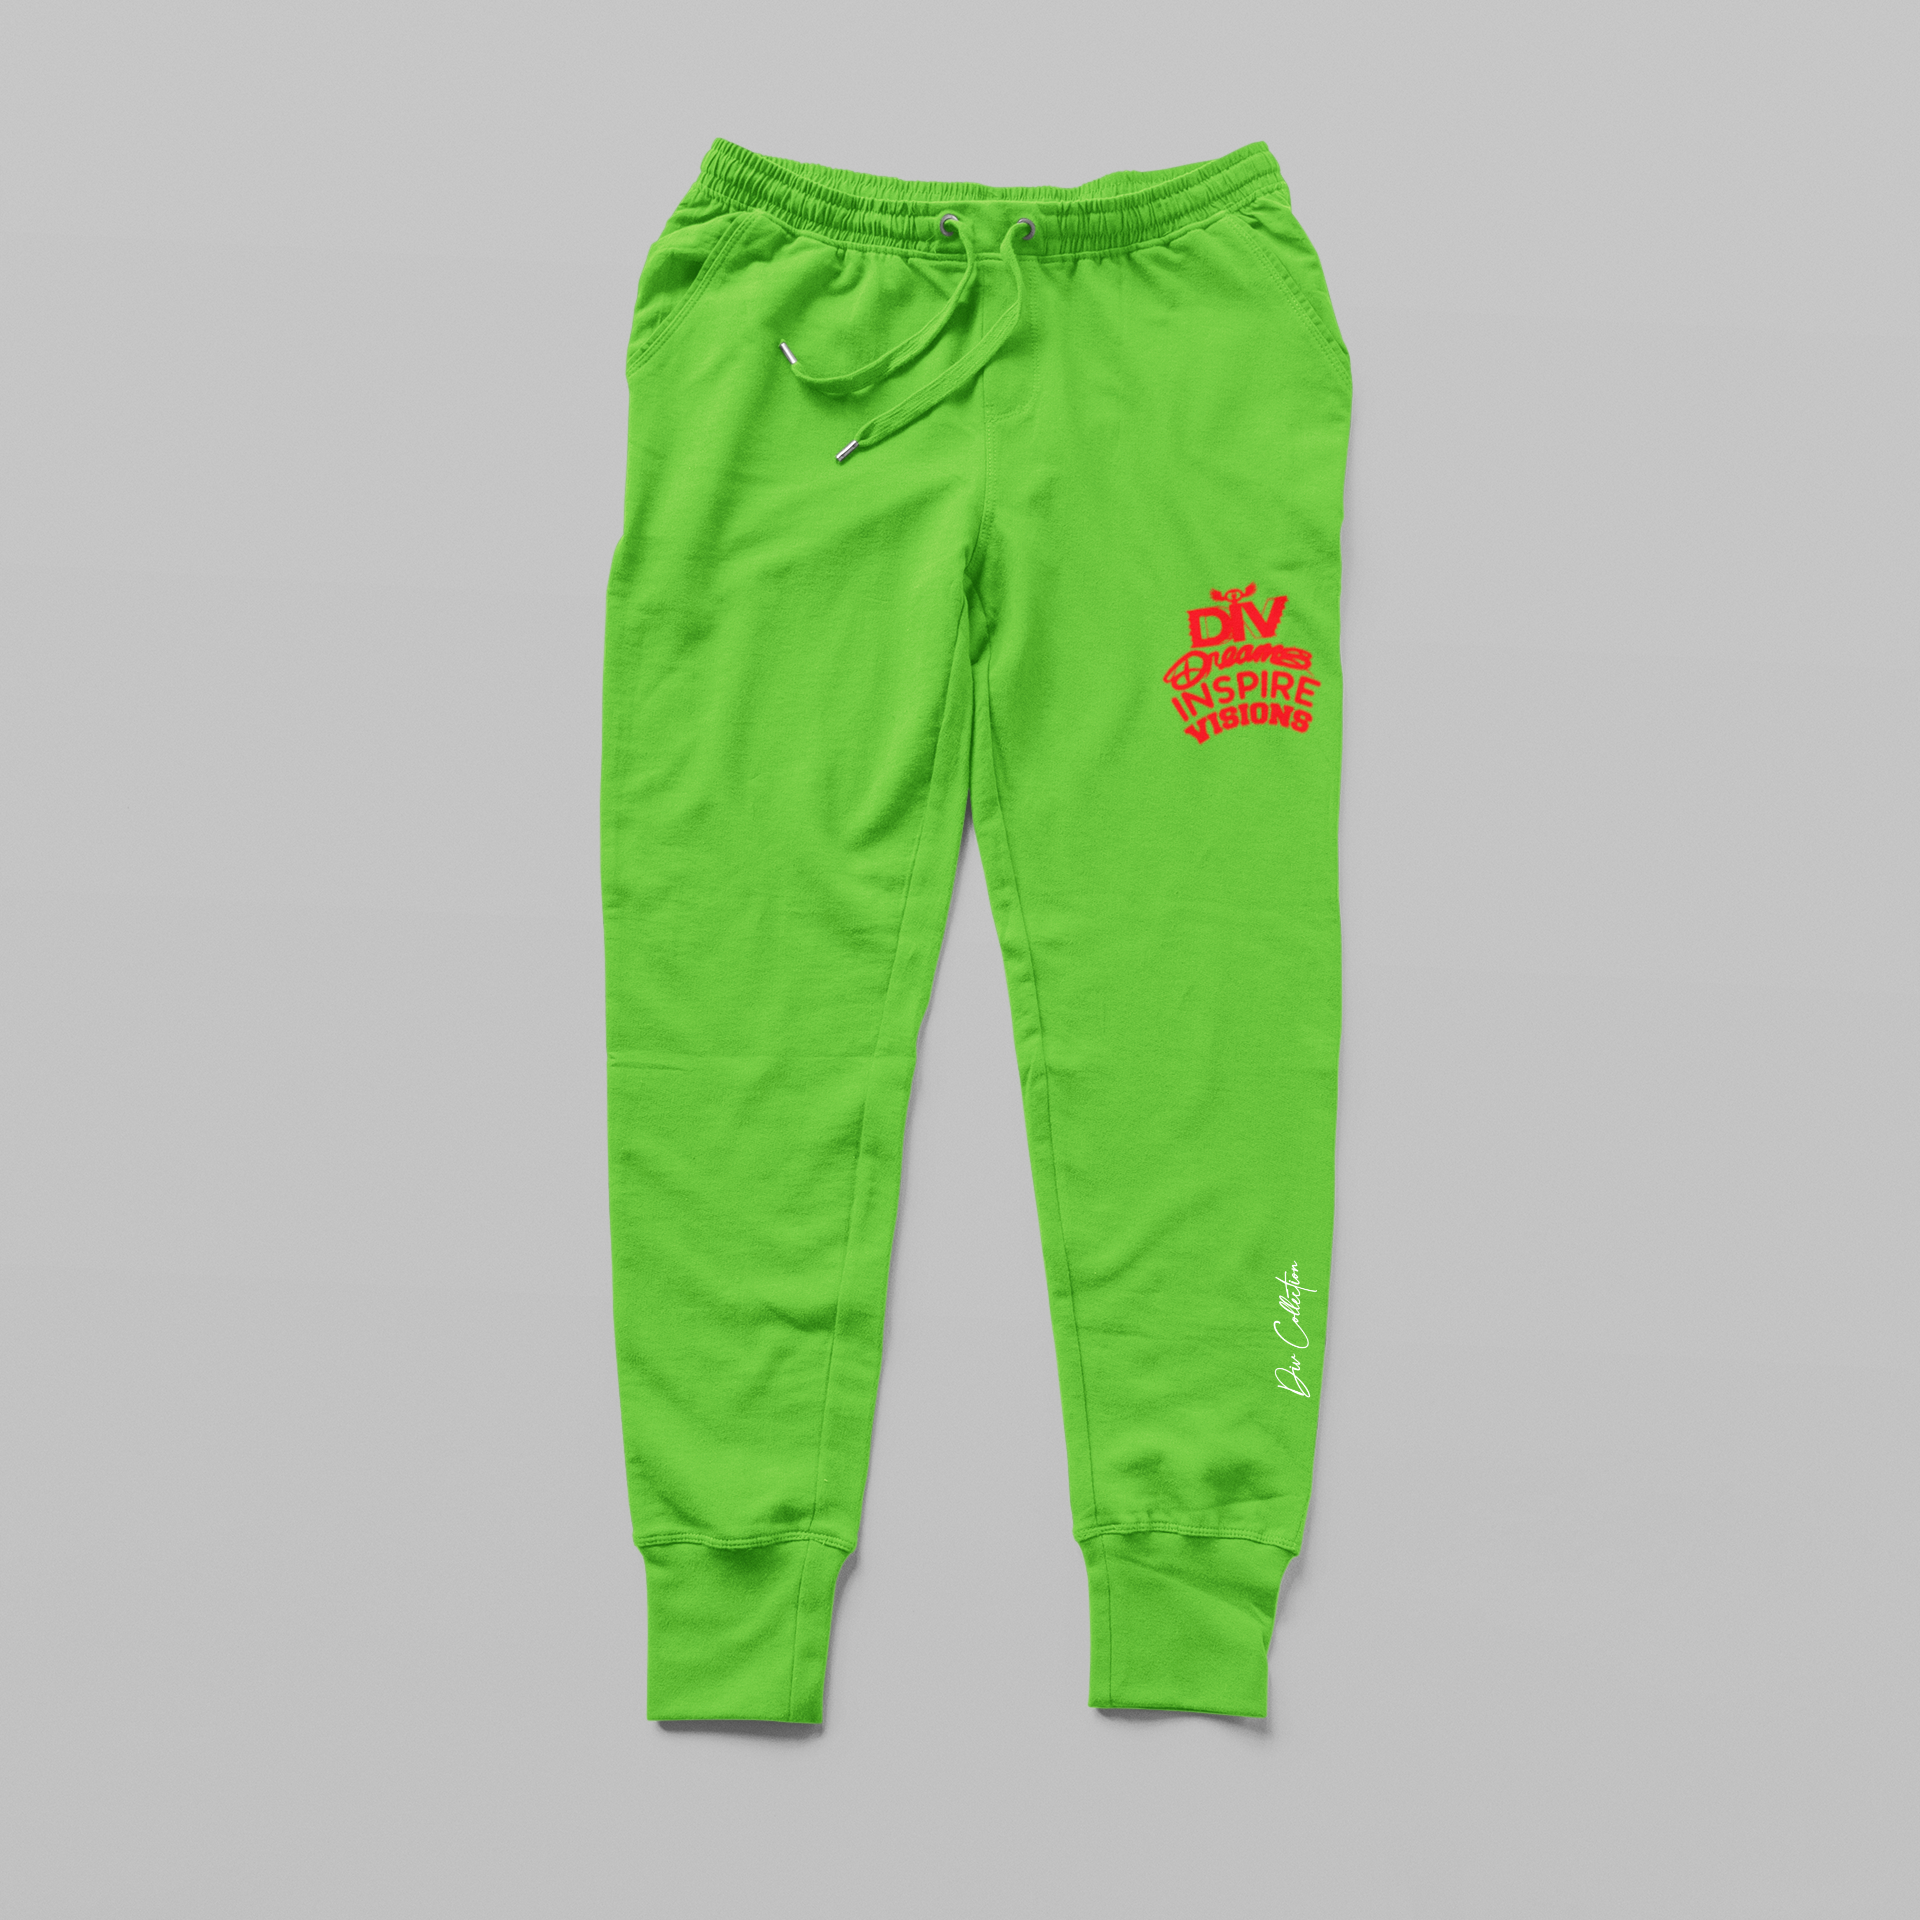 DIV Jogger Set in Kelly Green